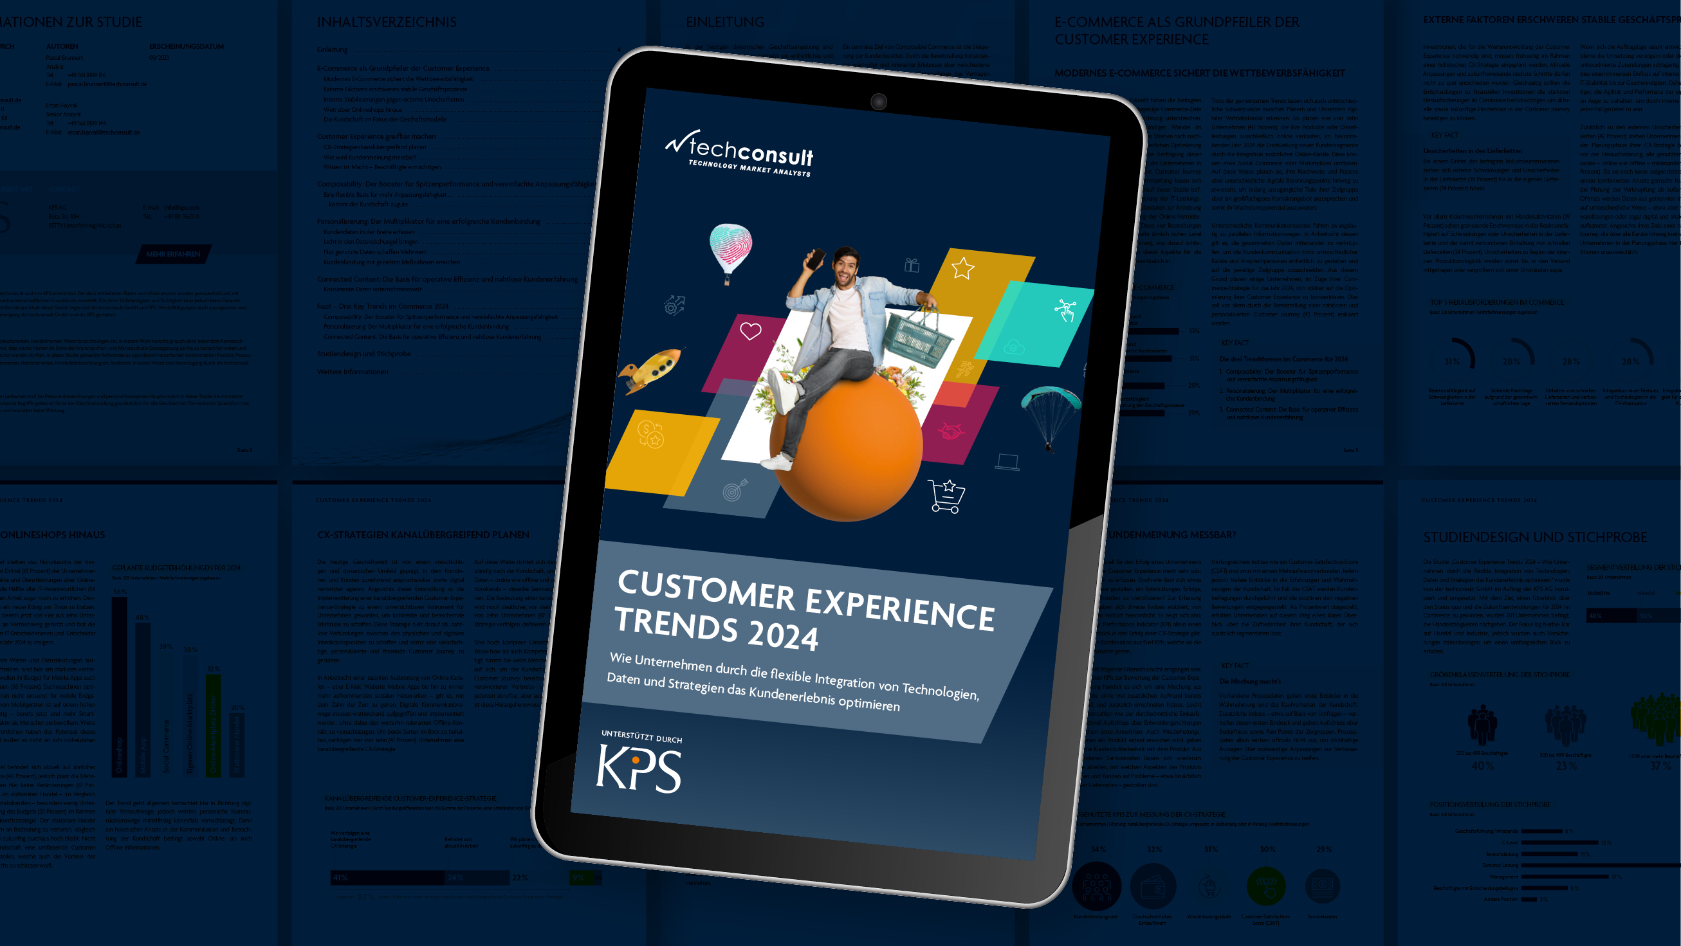 Report on Customer Experience Trends